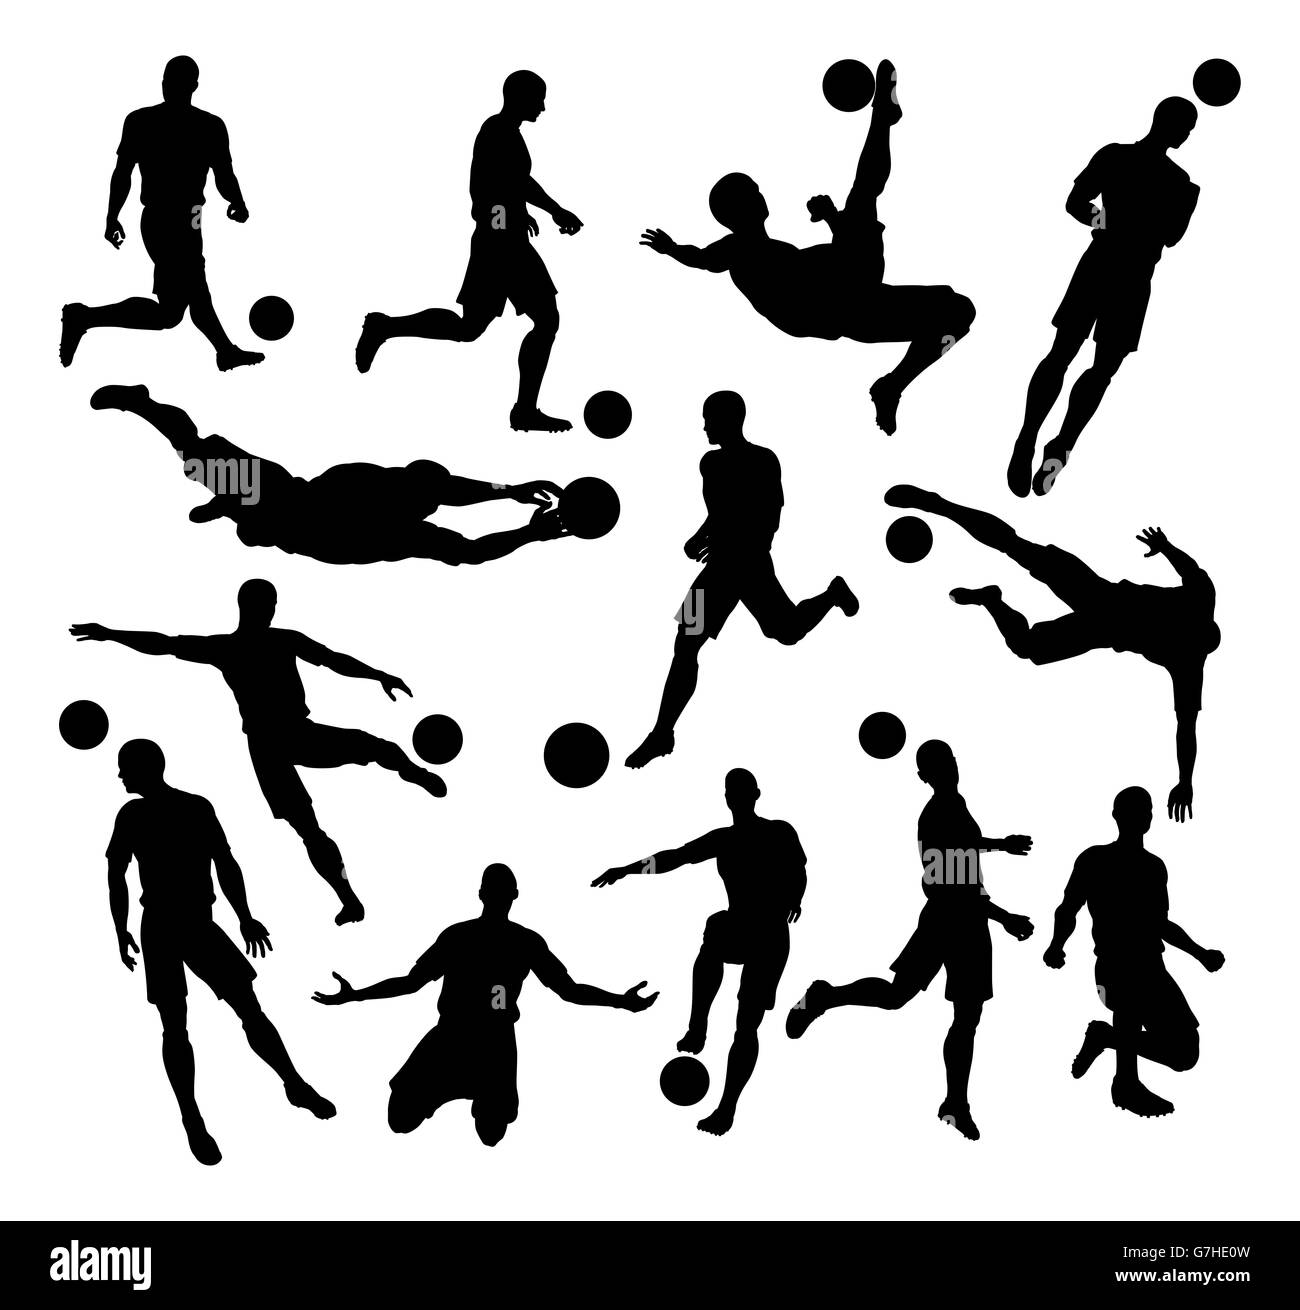 A set of Soccer Football Player Silhouettes in lots of different poses Stock Photo